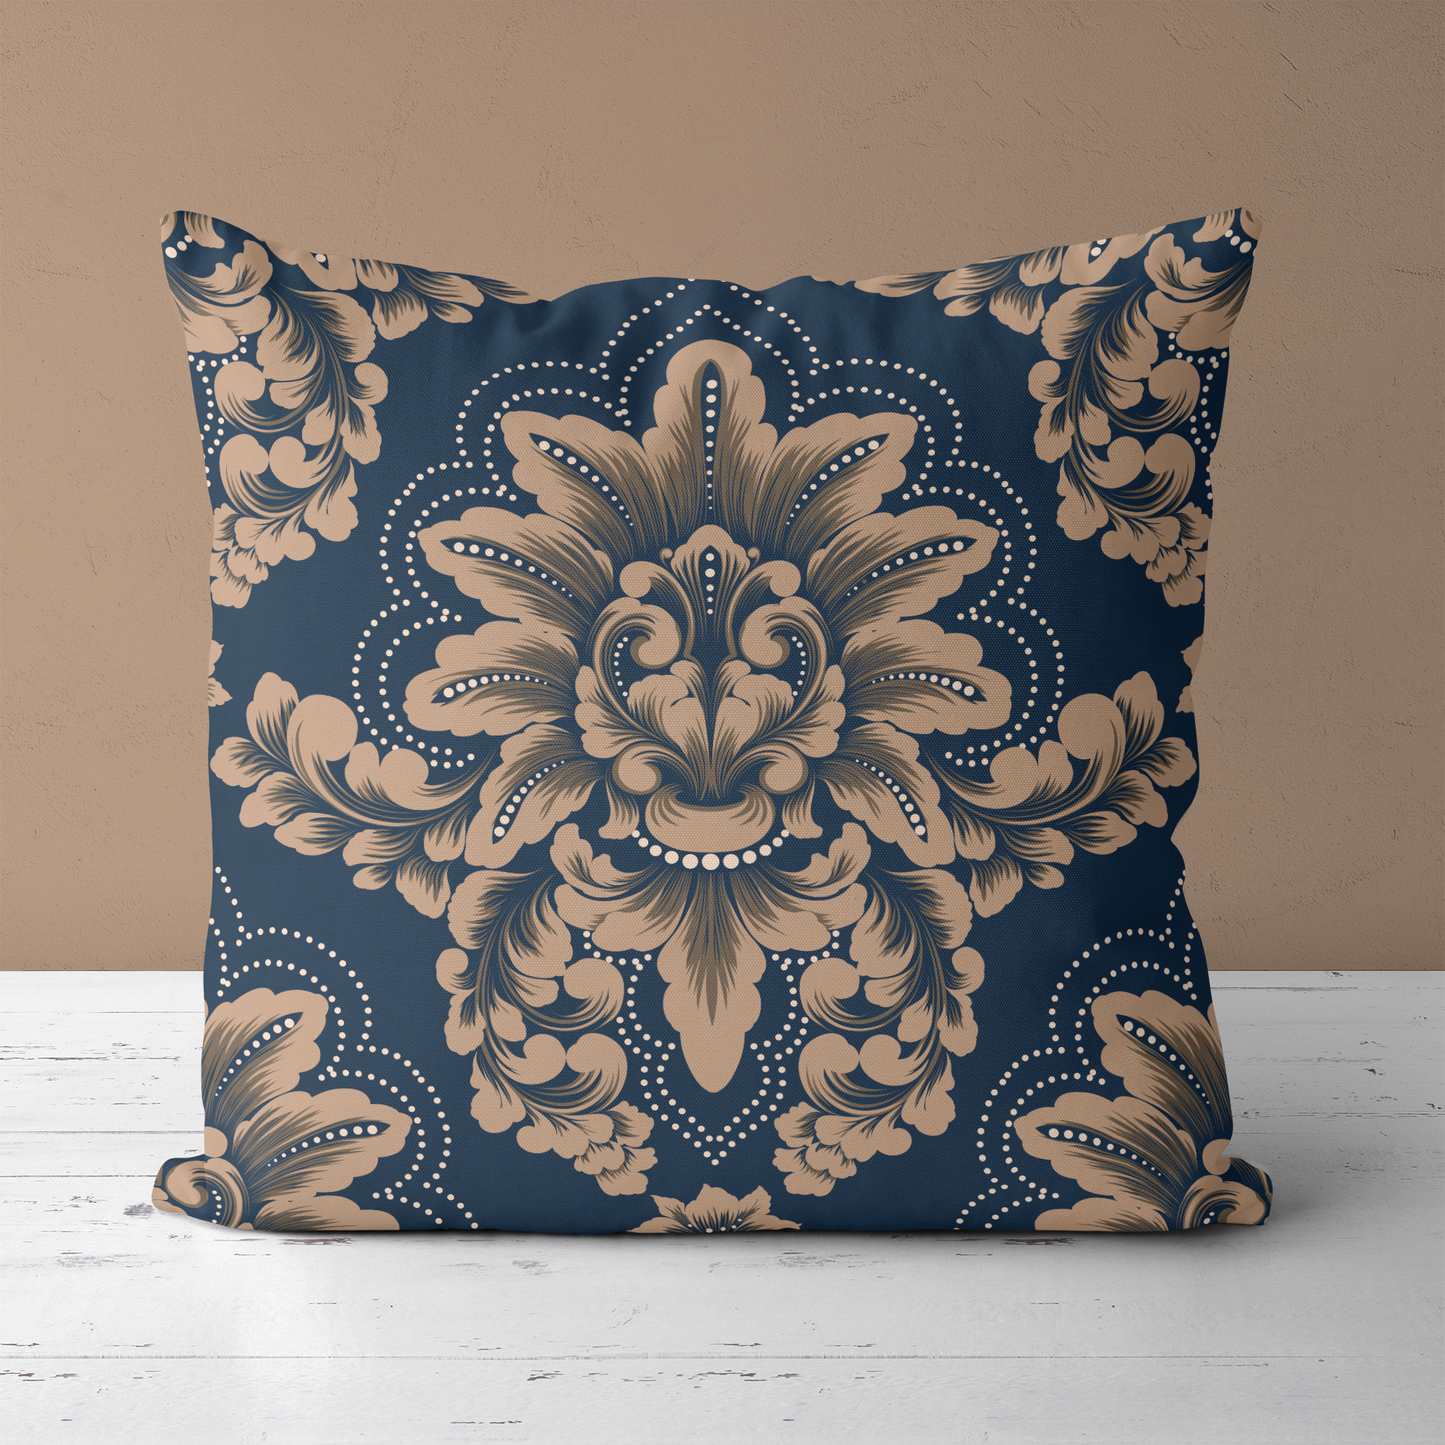 Victorian Artistic Eclectic Throw Pillow